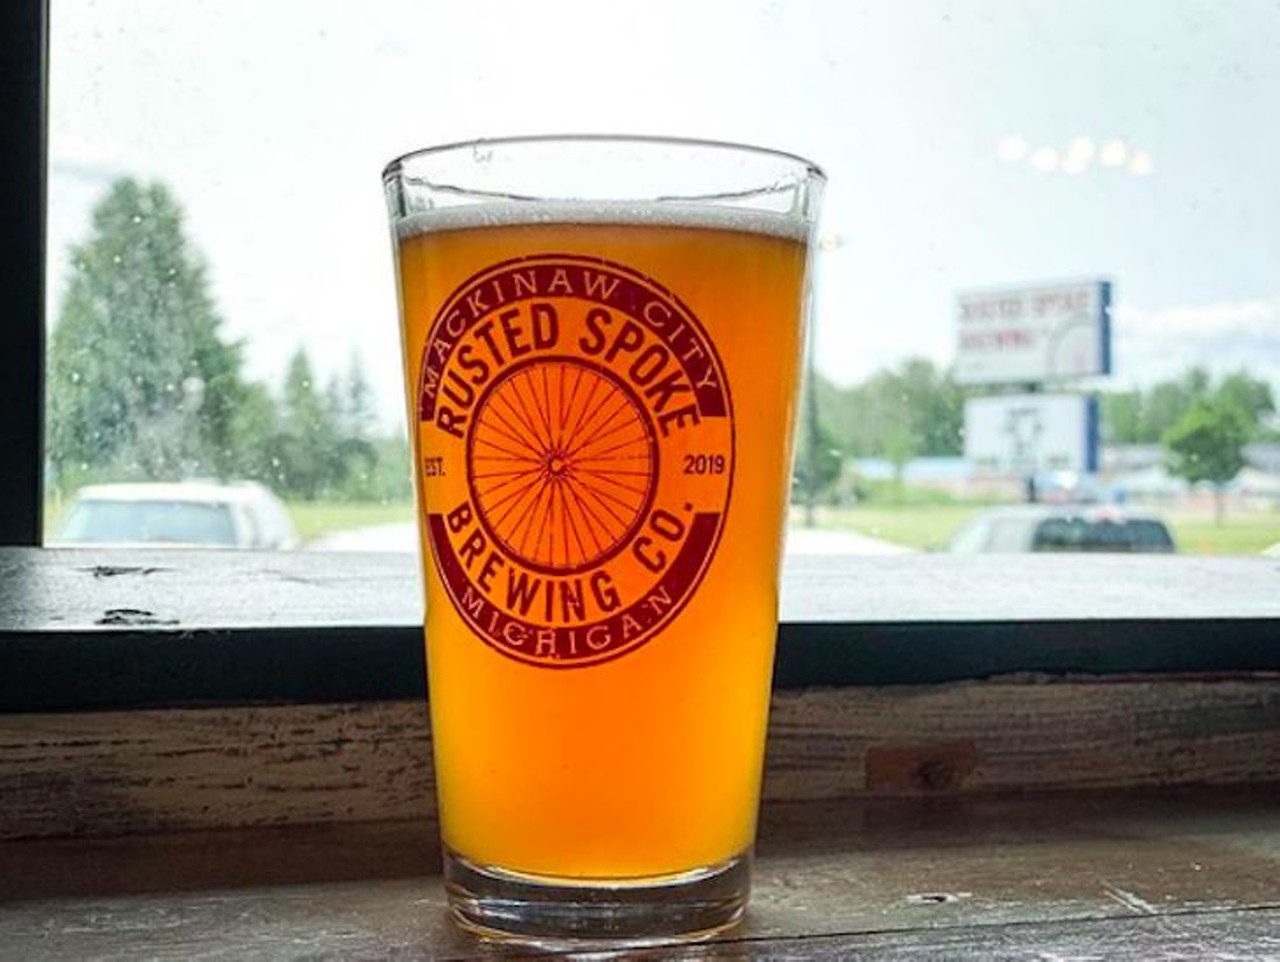 Rusted Spoke Brewing
810 S. Huron Ave., Mackinaw City; 231-436-5773; rustedspoke.com
Not going to lie, &#147;Michigangster&#148; might be our new favorite word, and it just so happens to be a cherry and peach wheat ale that&#146;s on tap at Rusted Spoke. While most pubs only offer their in-house craft beers, this spot pours up some other local favorites, too.
Photo via Google Maps